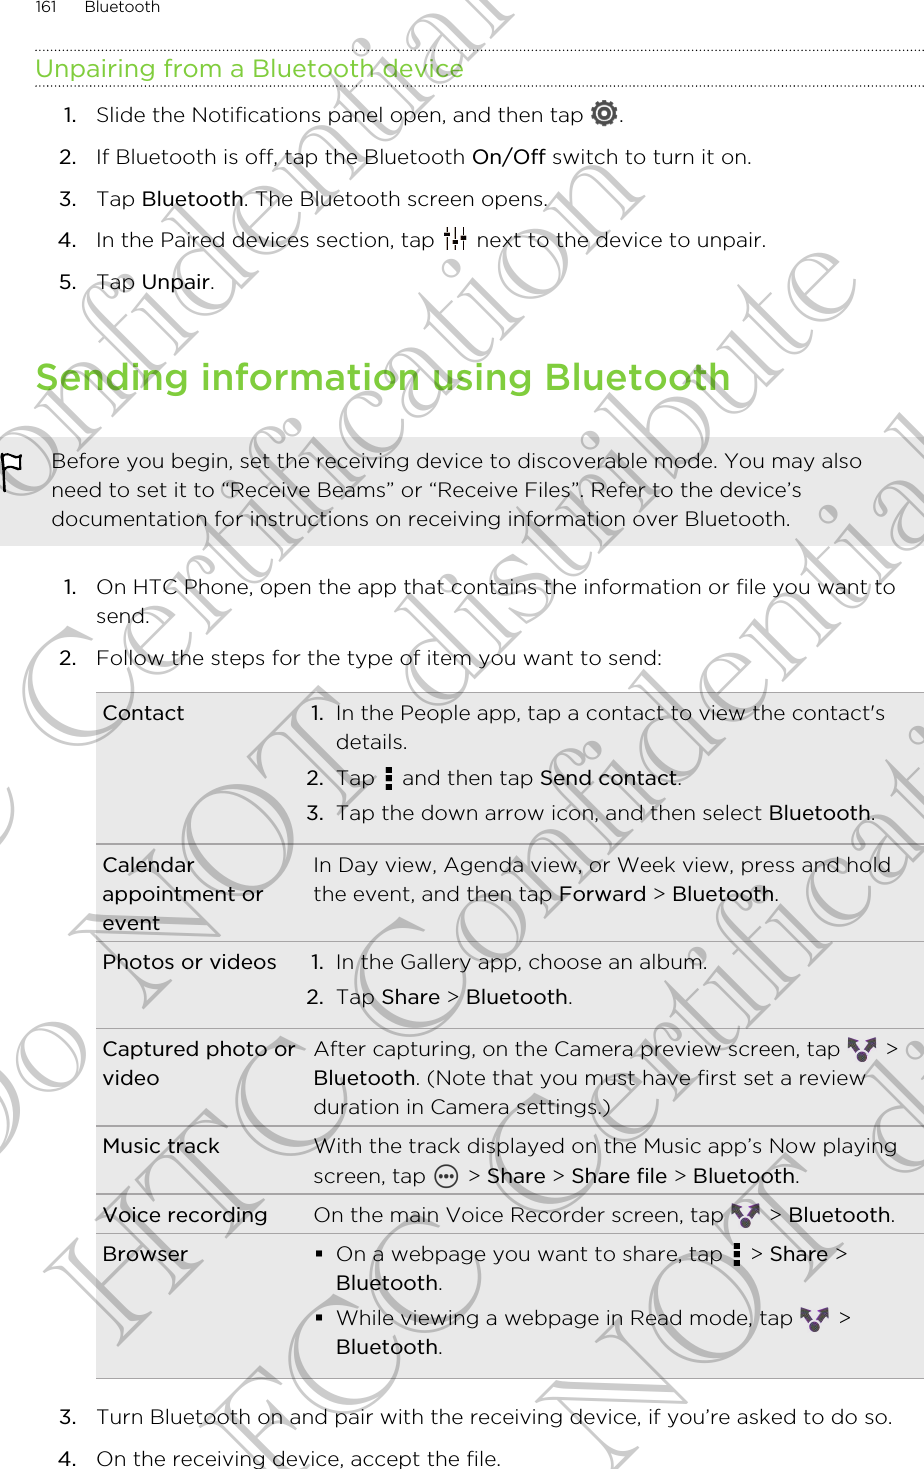 Unpairing from a Bluetooth device1. Slide the Notifications panel open, and then tap  .2. If Bluetooth is off, tap the Bluetooth On/Off switch to turn it on.3. Tap Bluetooth. The Bluetooth screen opens.4. In the Paired devices section, tap   next to the device to unpair.5. Tap Unpair.Sending information using BluetoothBefore you begin, set the receiving device to discoverable mode. You may alsoneed to set it to “Receive Beams” or “Receive Files”. Refer to the device’sdocumentation for instructions on receiving information over Bluetooth.1. On HTC Phone, open the app that contains the information or file you want tosend.2. Follow the steps for the type of item you want to send:Contact 1. In the People app, tap a contact to view the contact&apos;sdetails.2. Tap   and then tap Send contact.3. Tap the down arrow icon, and then select Bluetooth.Calendarappointment oreventIn Day view, Agenda view, or Week view, press and holdthe event, and then tap Forward &gt; Bluetooth.Photos or videos 1. In the Gallery app, choose an album.2. Tap Share &gt; Bluetooth.Captured photo orvideoAfter capturing, on the Camera preview screen, tap   &gt;Bluetooth. (Note that you must have first set a reviewduration in Camera settings.)Music track With the track displayed on the Music app’s Now playingscreen, tap   &gt; Share &gt; Share file &gt; Bluetooth.Voice recording On the main Voice Recorder screen, tap   &gt; Bluetooth.Browser §On a webpage you want to share, tap   &gt; Share &gt;Bluetooth.§While viewing a webpage in Read mode, tap   &gt;Bluetooth.3. Turn Bluetooth on and pair with the receiving device, if you’re asked to do so.4. On the receiving device, accept the file.161 BluetoothHTC Confidential FCC Certification Do NOT distribute HTC Confidential FCC Certification Do NOT distribute